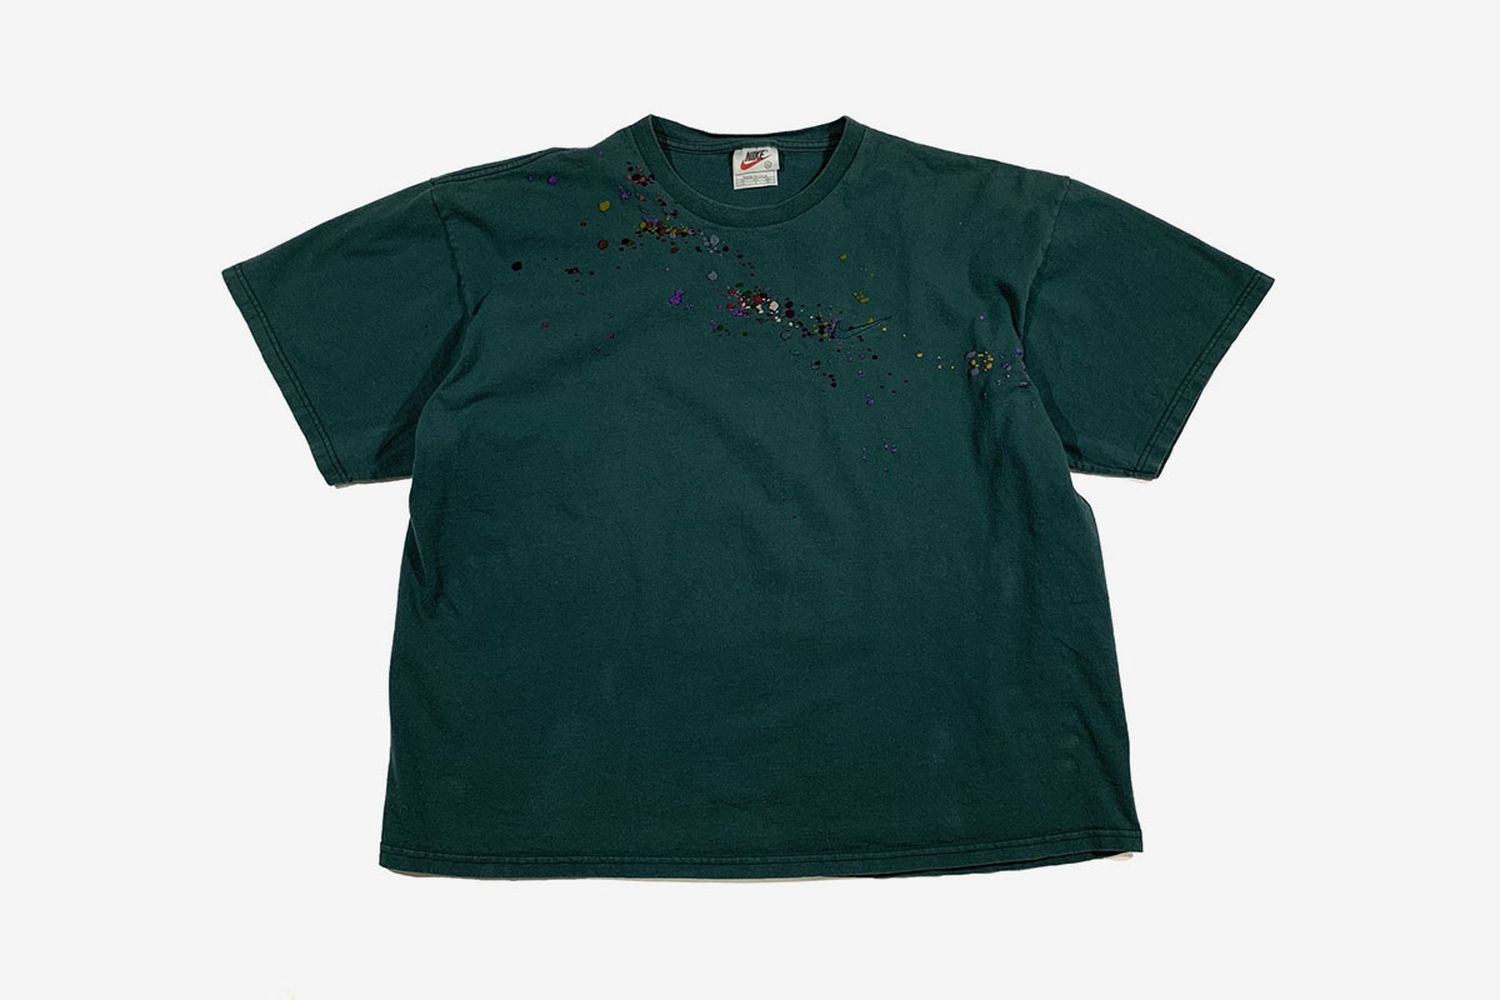 'Forest Thru The Trees' Vintage Nike T-Shirt